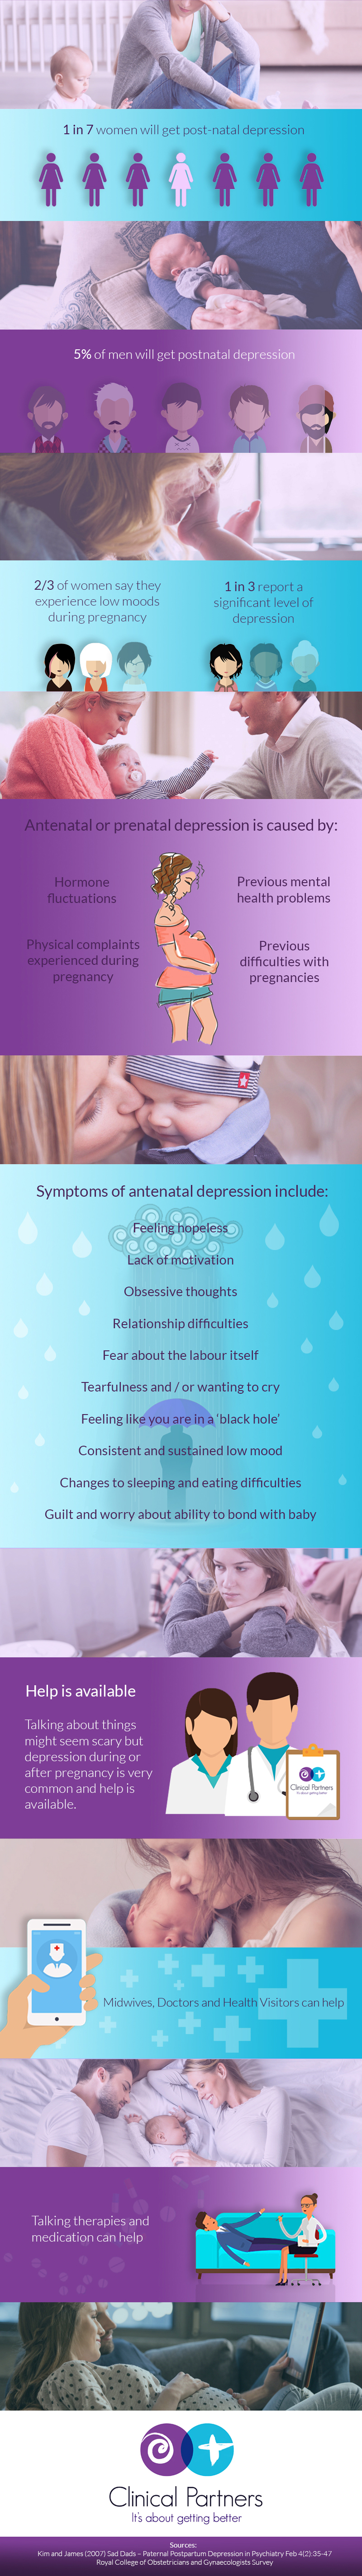 Antenatal Depression Infographic | Clinical Partners